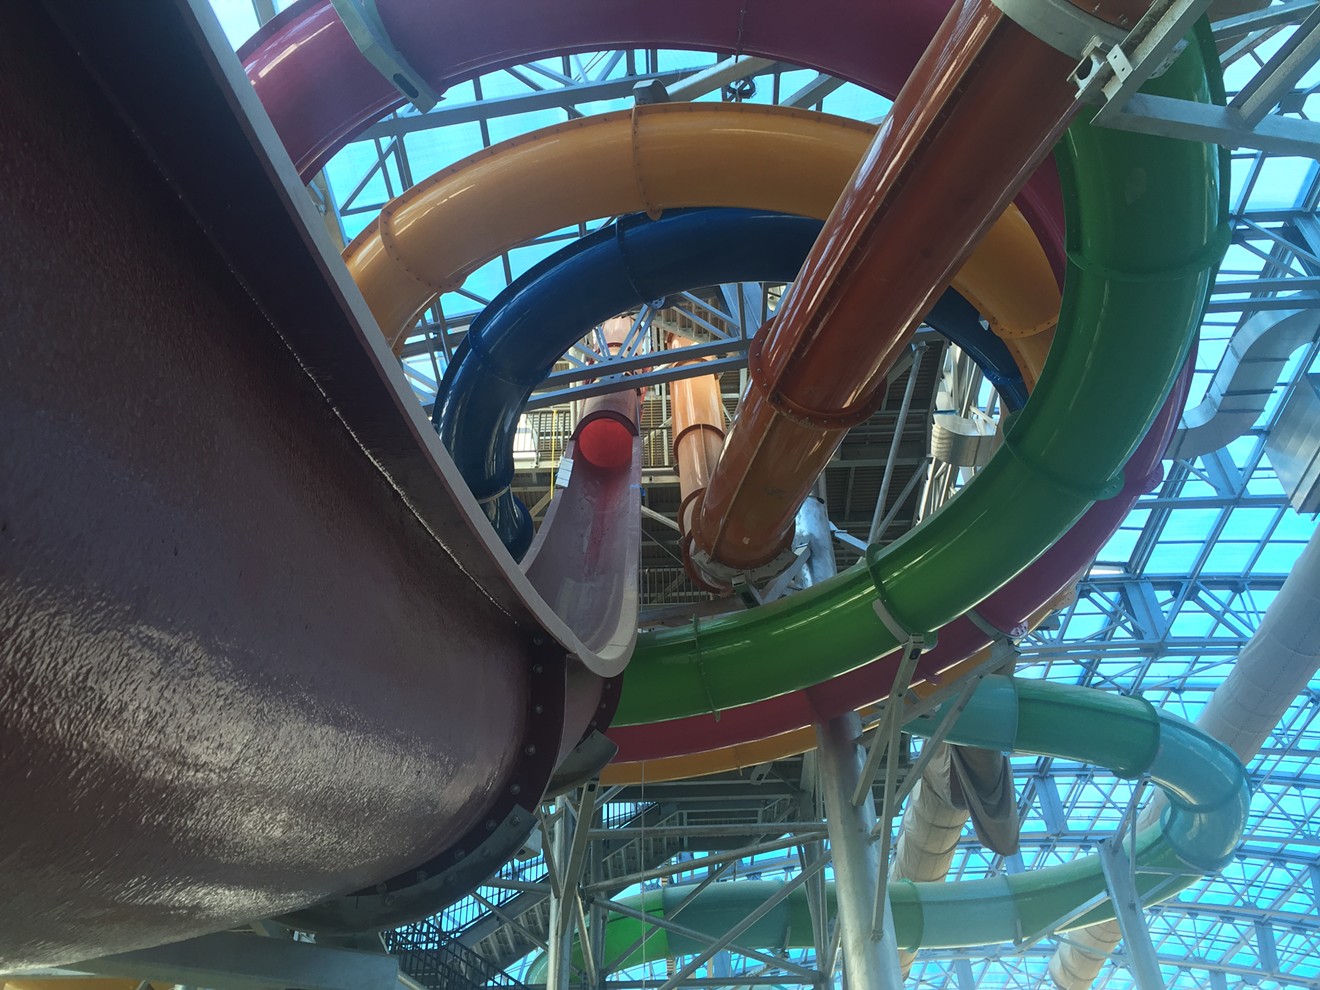 The two tallest and scariest-looking water slides have a "chicken out" slide that's not as steep or fast for guests who get to the top but lose the will to go through with it, says Steve Brinkel, the general manager of parks and recreation for Whitewater West Industries.